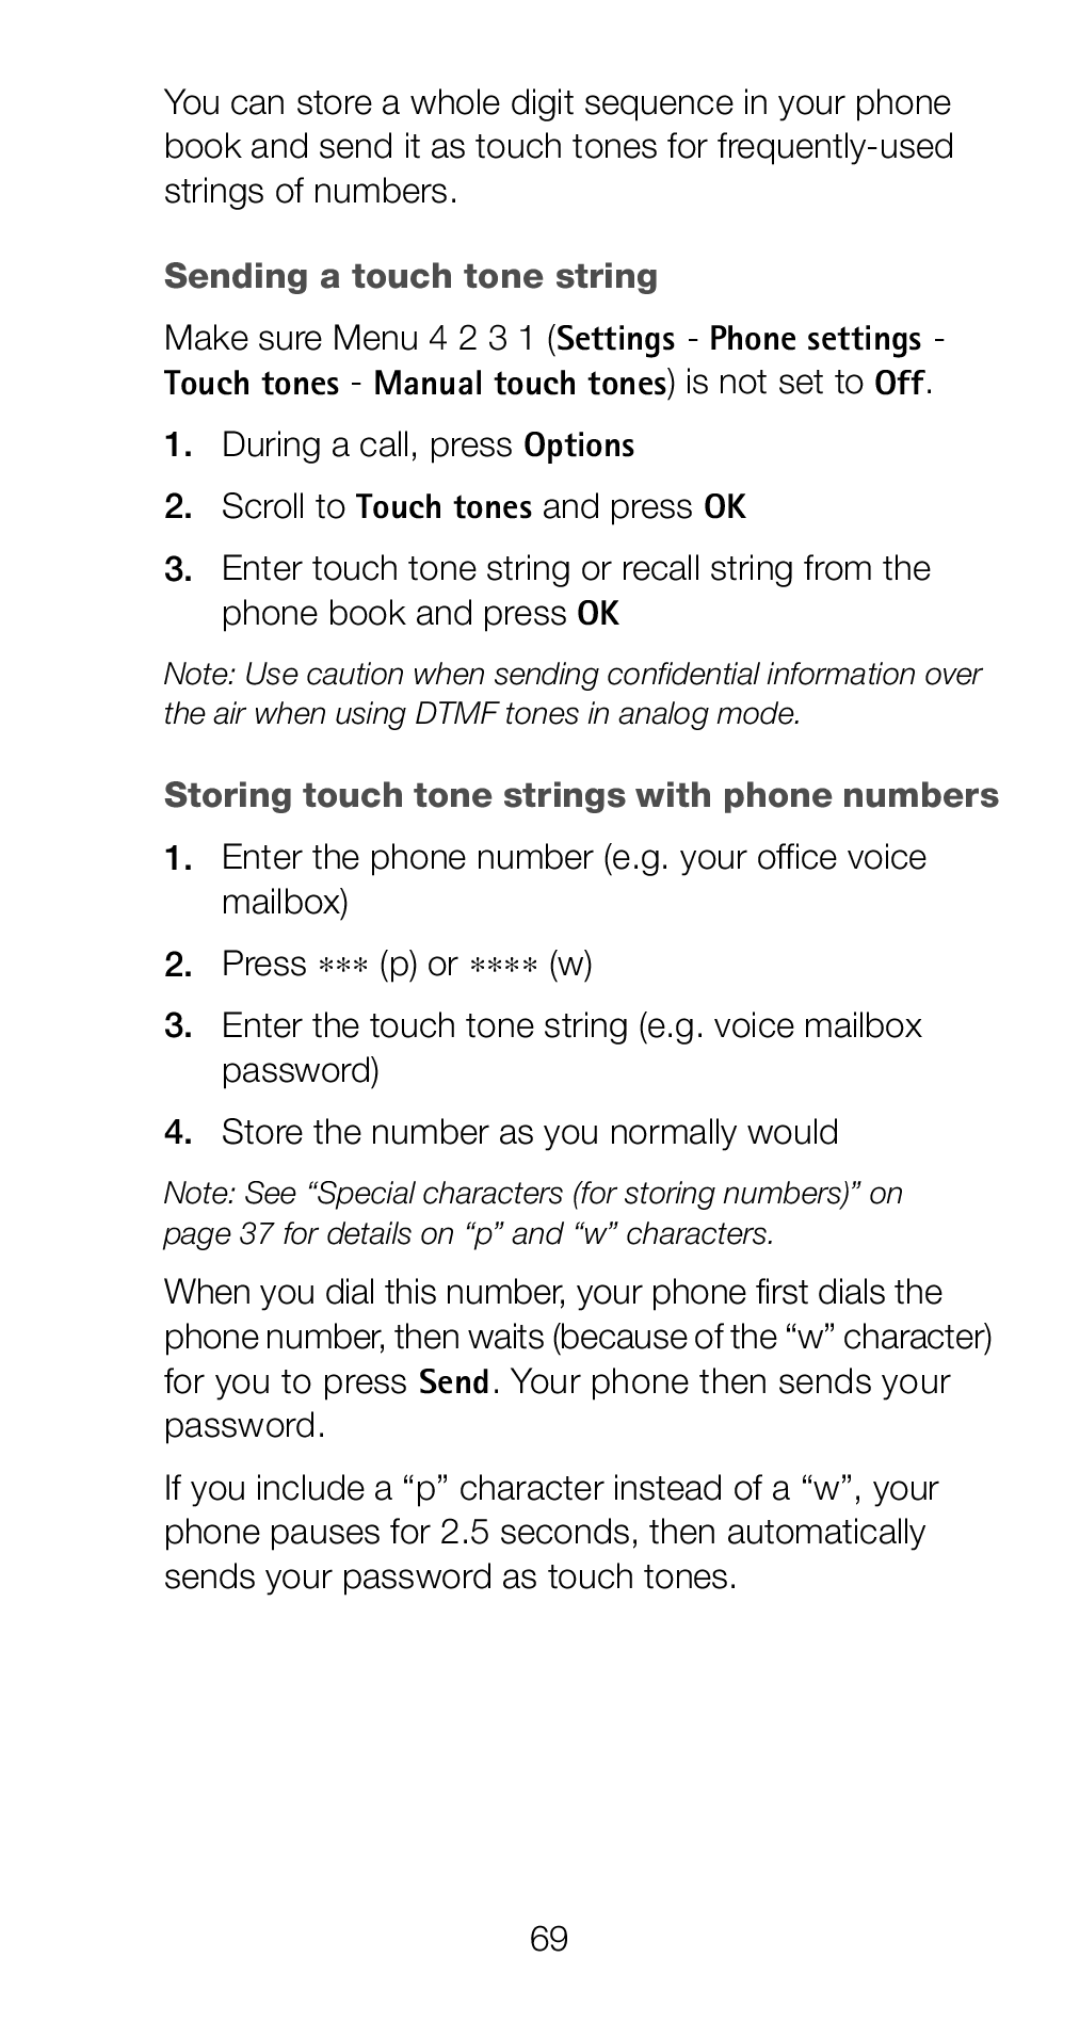 Nokia 6161i owner manual Sending a touch tone string, Storing touch tone strings with phone numbers 